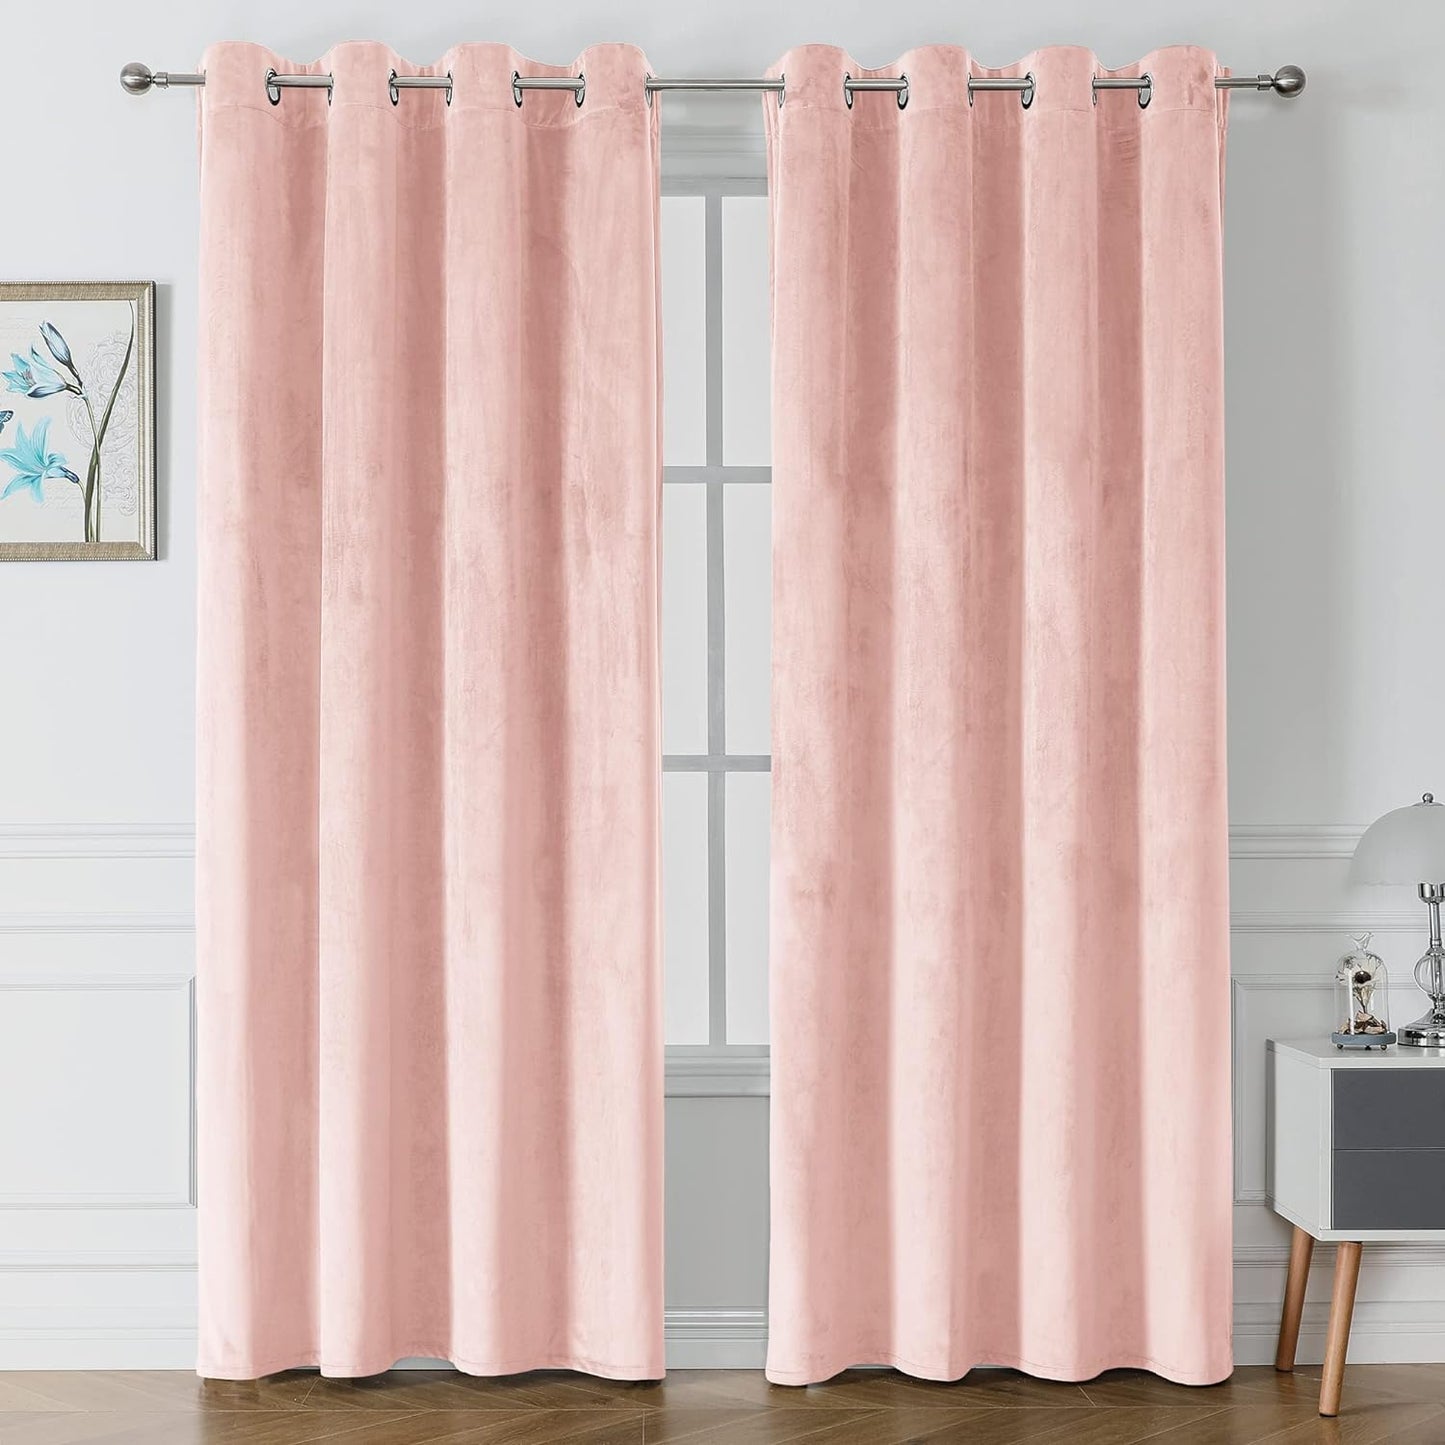 Victree Velvet Curtains for Bedroom, Blackout Curtains 52 X 84 Inch Length - Room Darkening Sun Light Blocking Grommet Window Drapes for Living Room, 2 Panels, Navy  Victree Pink 52 X 96 Inches 